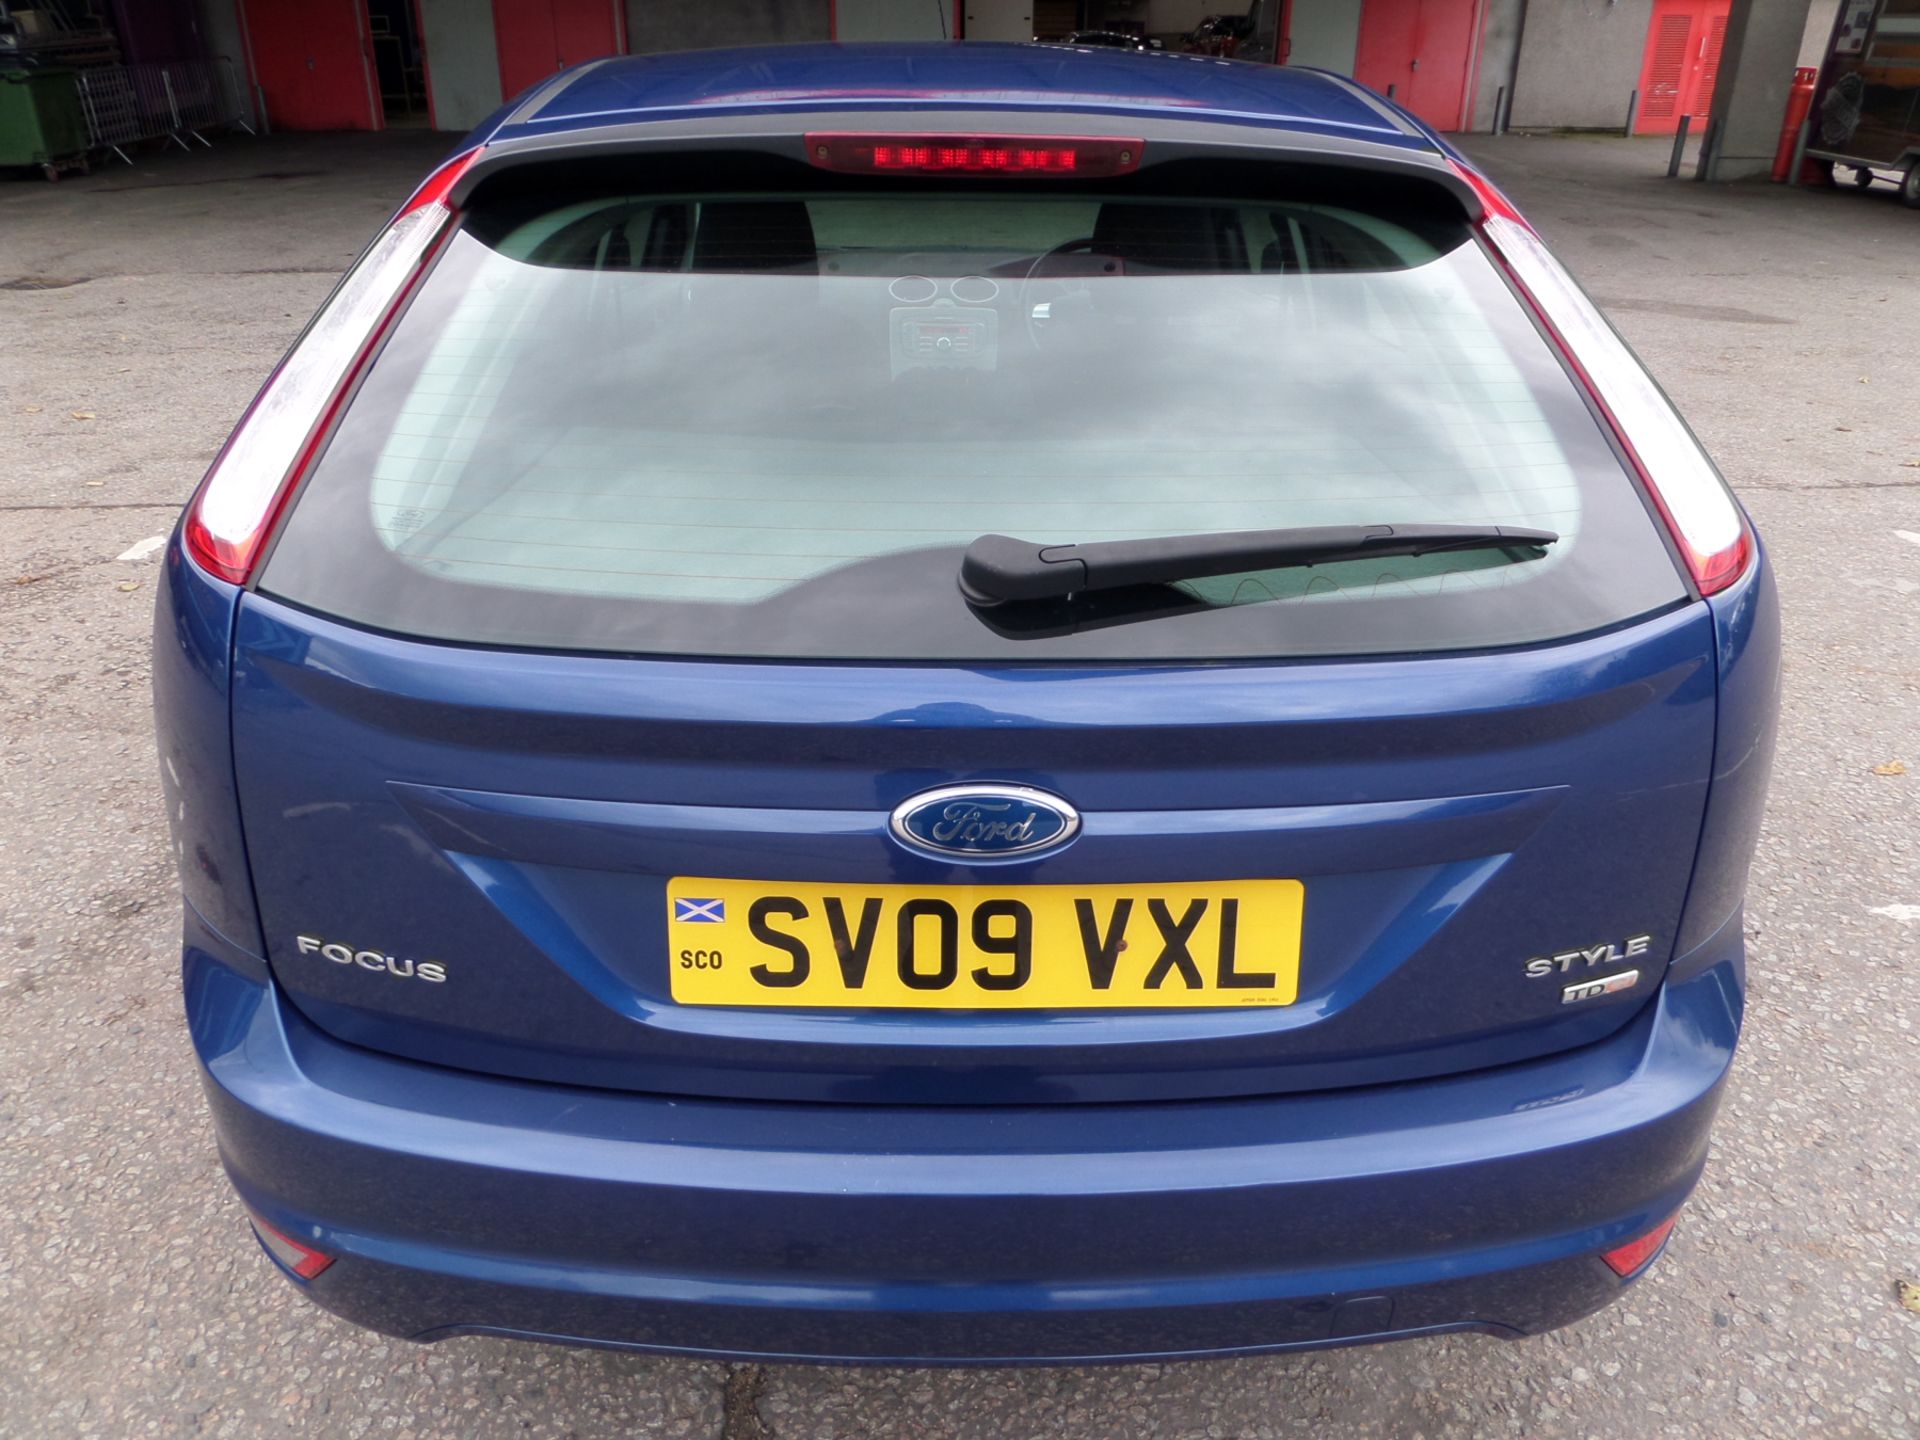 Ford Focus Style Td 115 - 1753cc 5 Door - Image 5 of 11